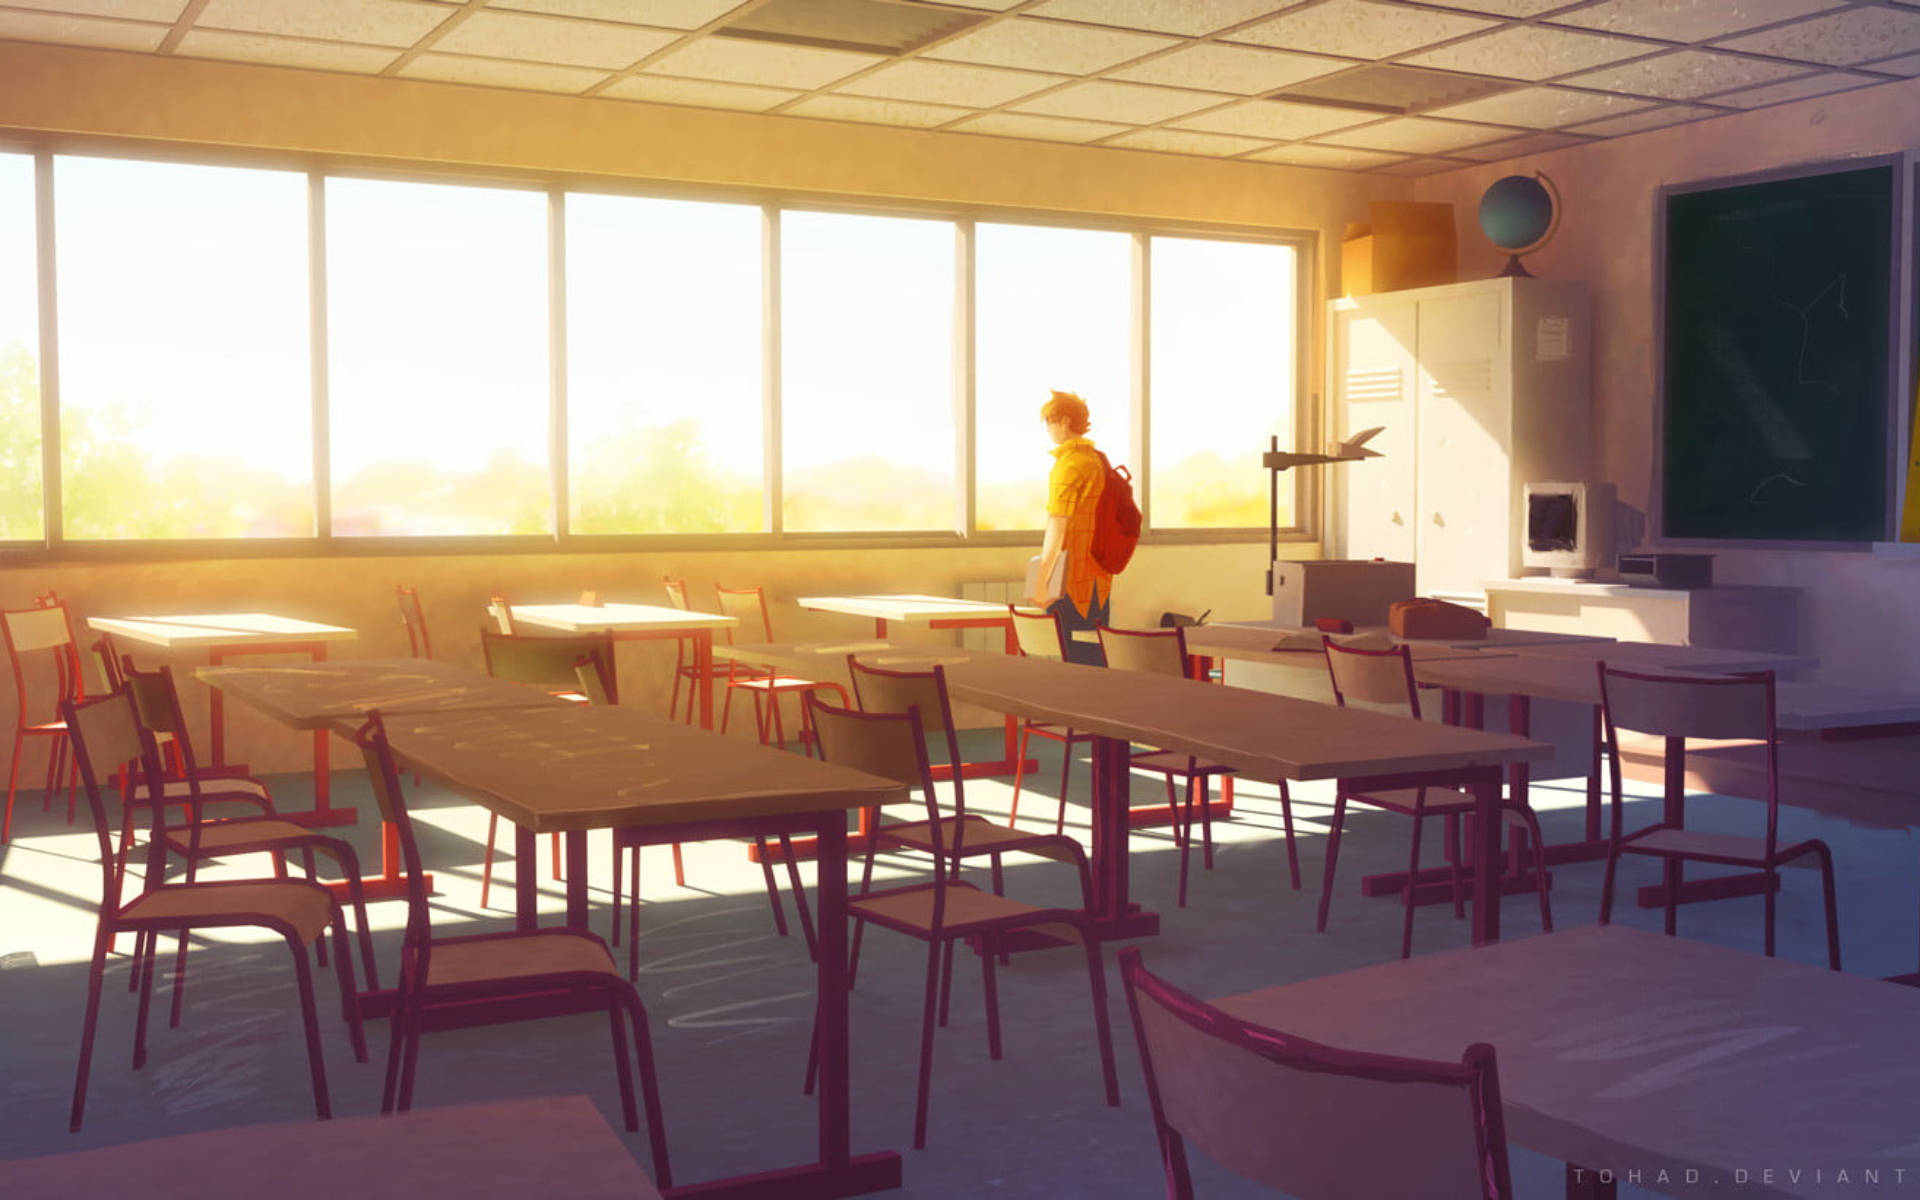 Alone Anime Boy In A Classroom Background